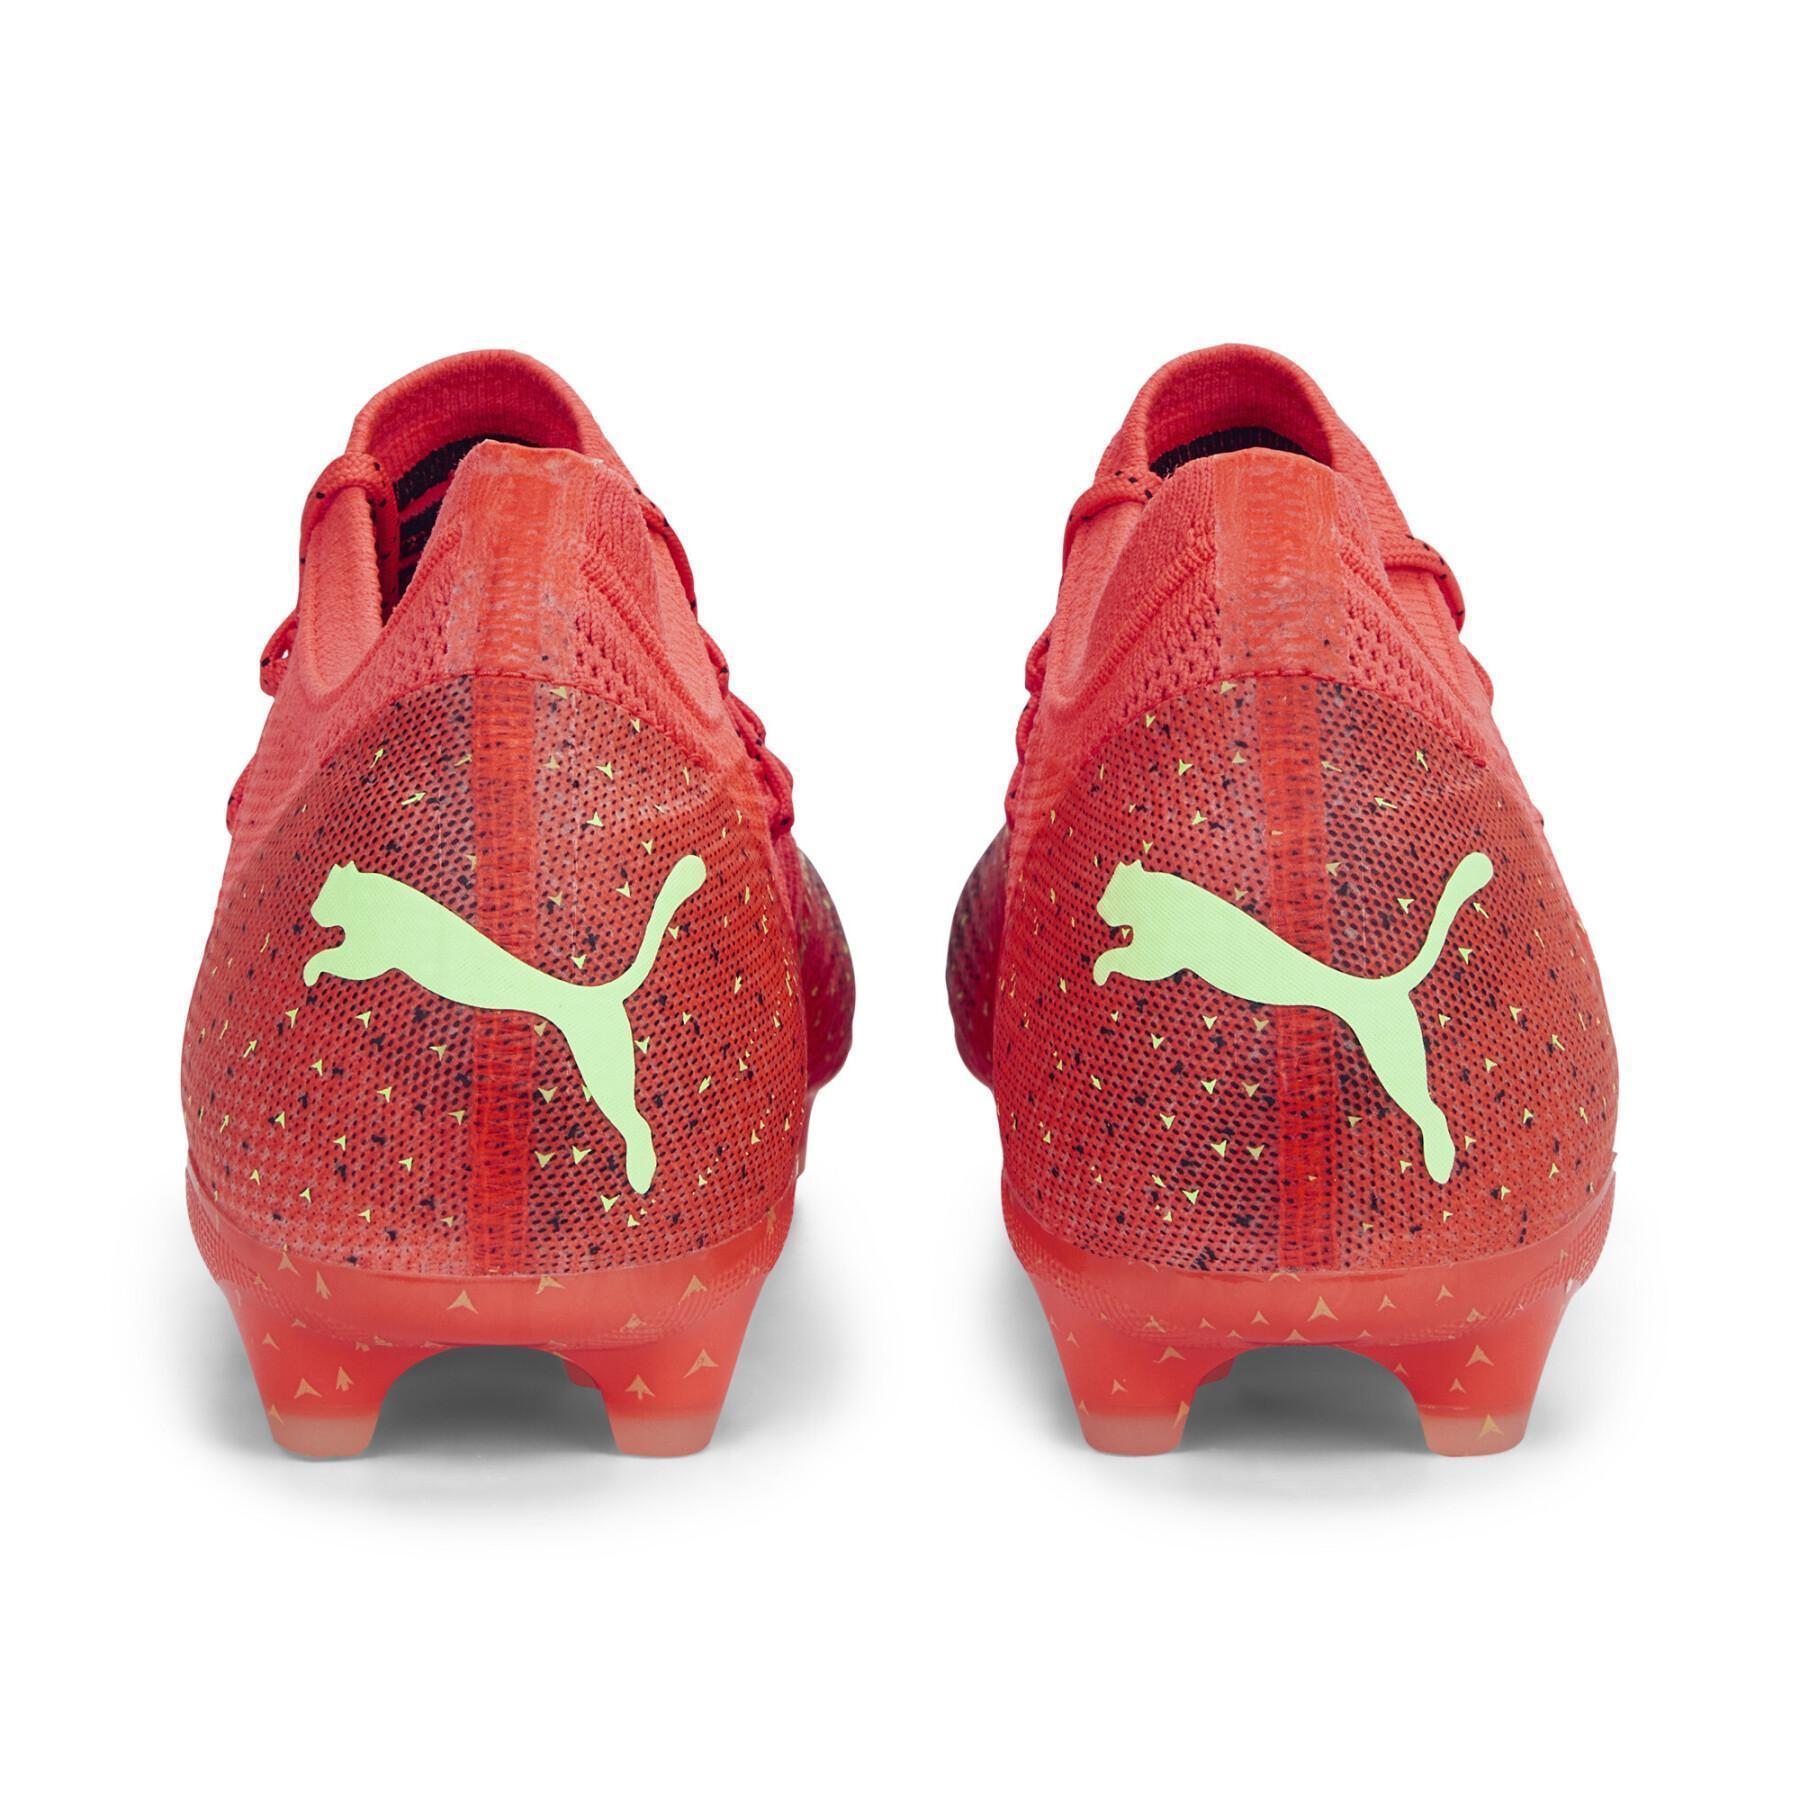 Soccer shoes Puma Future Z 1.4 FG/AG - Fearless Pack